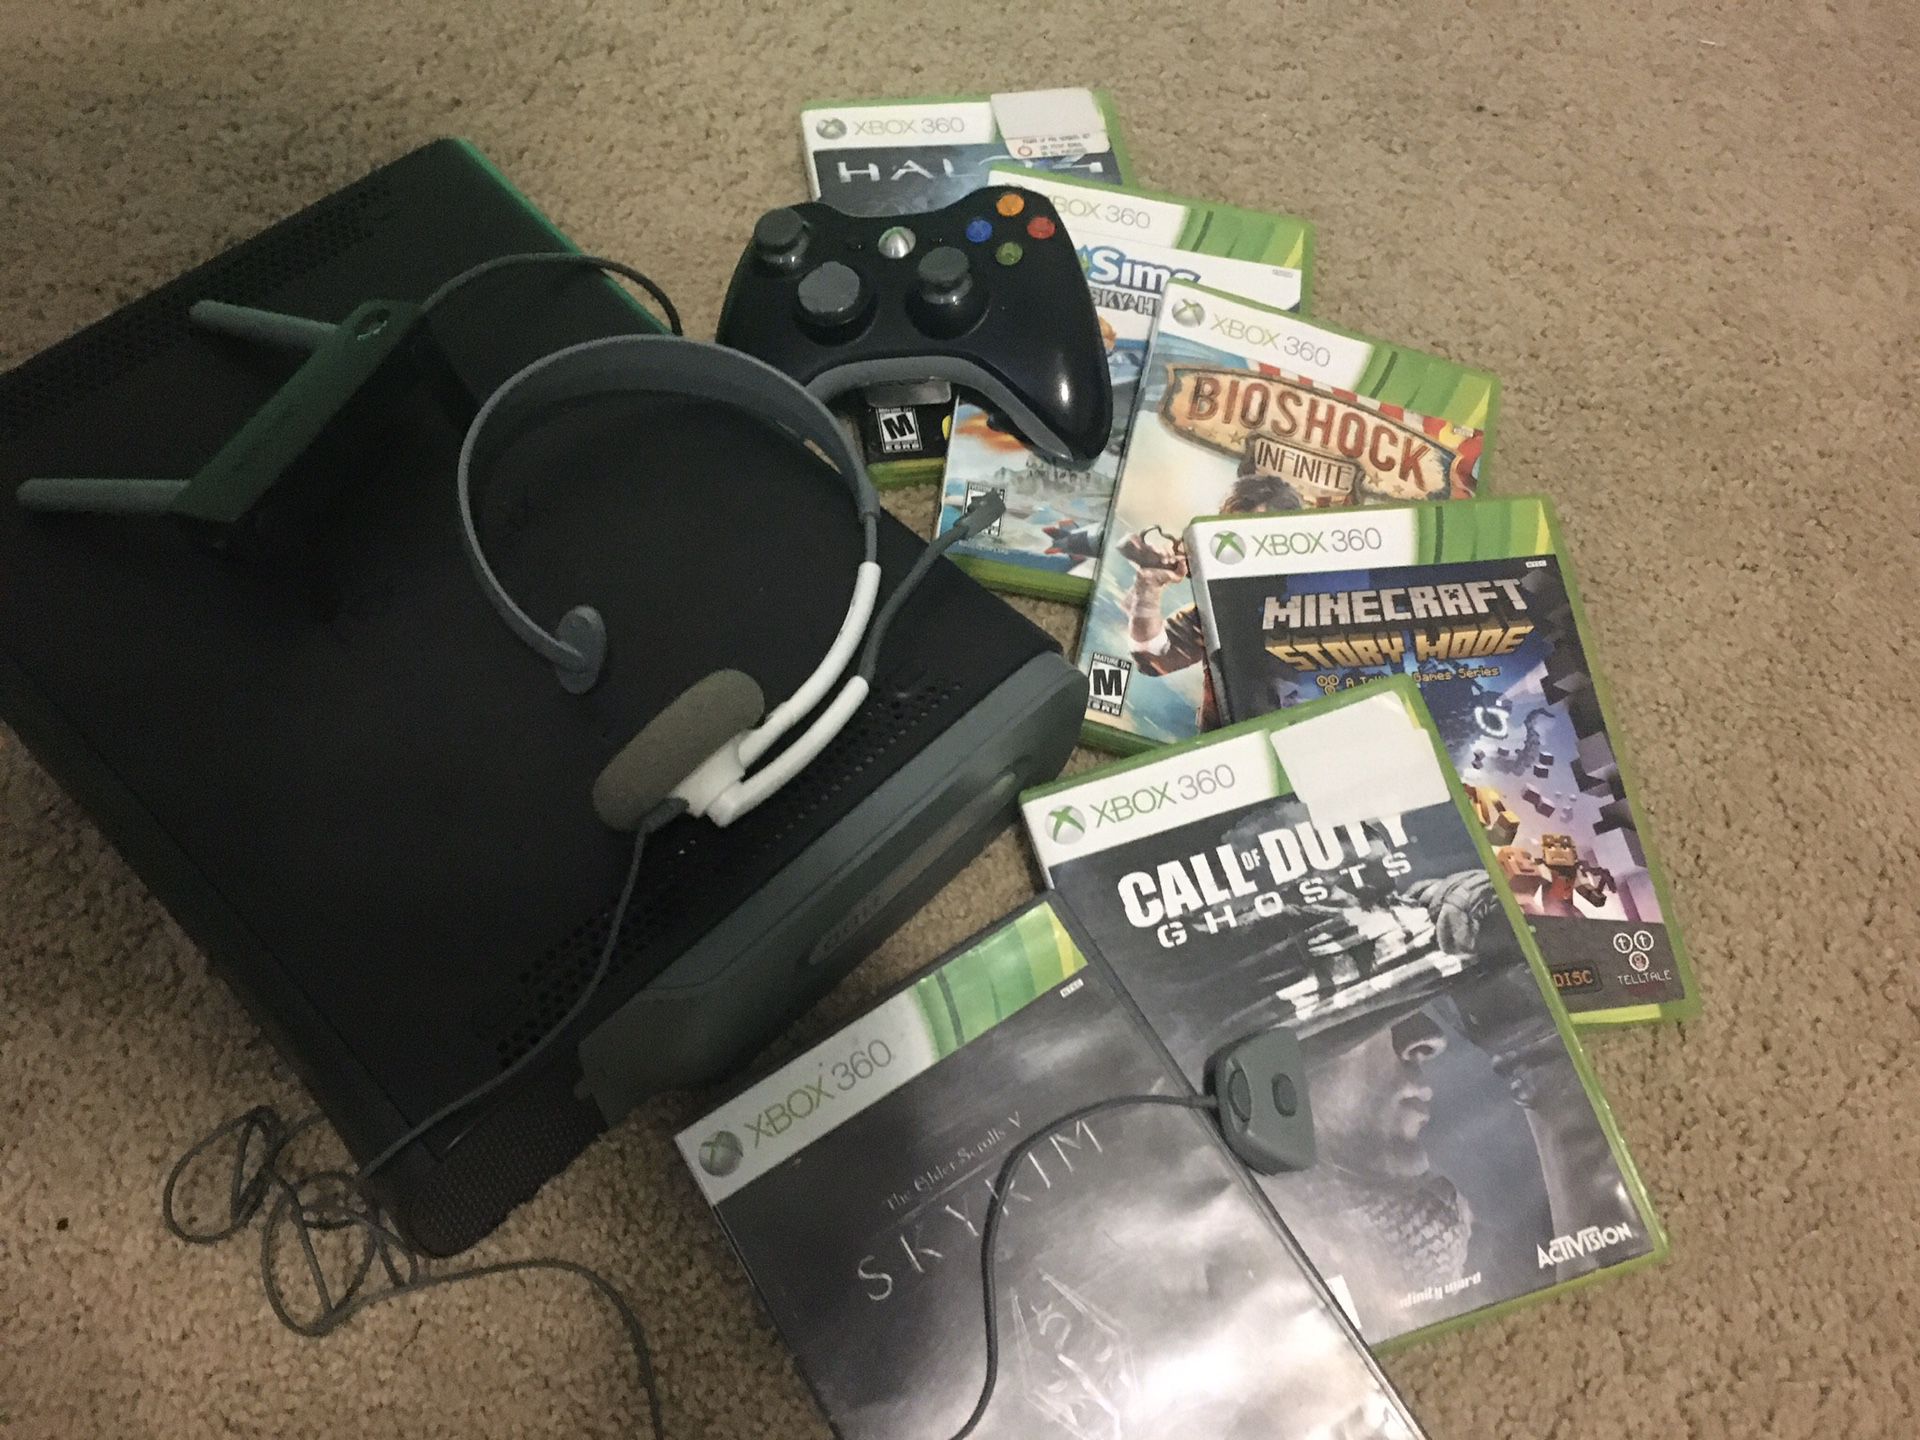 Xbox 360 Gray/Black, Accessories, and Games!